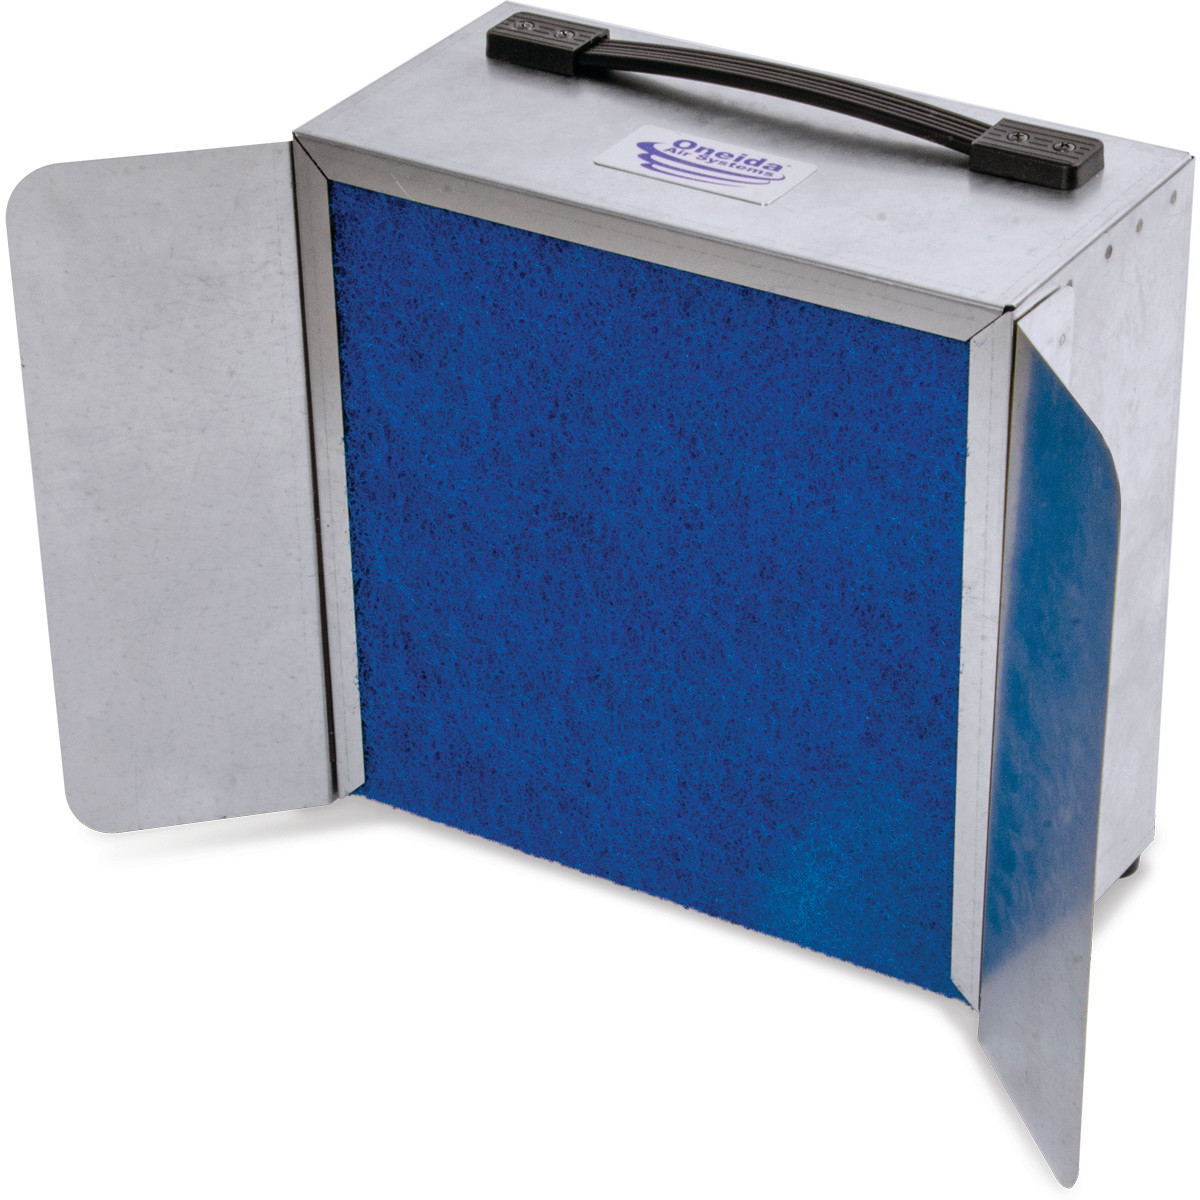 The BenchTop Mini from Oneida Air Systems captures fine dust as its source. 